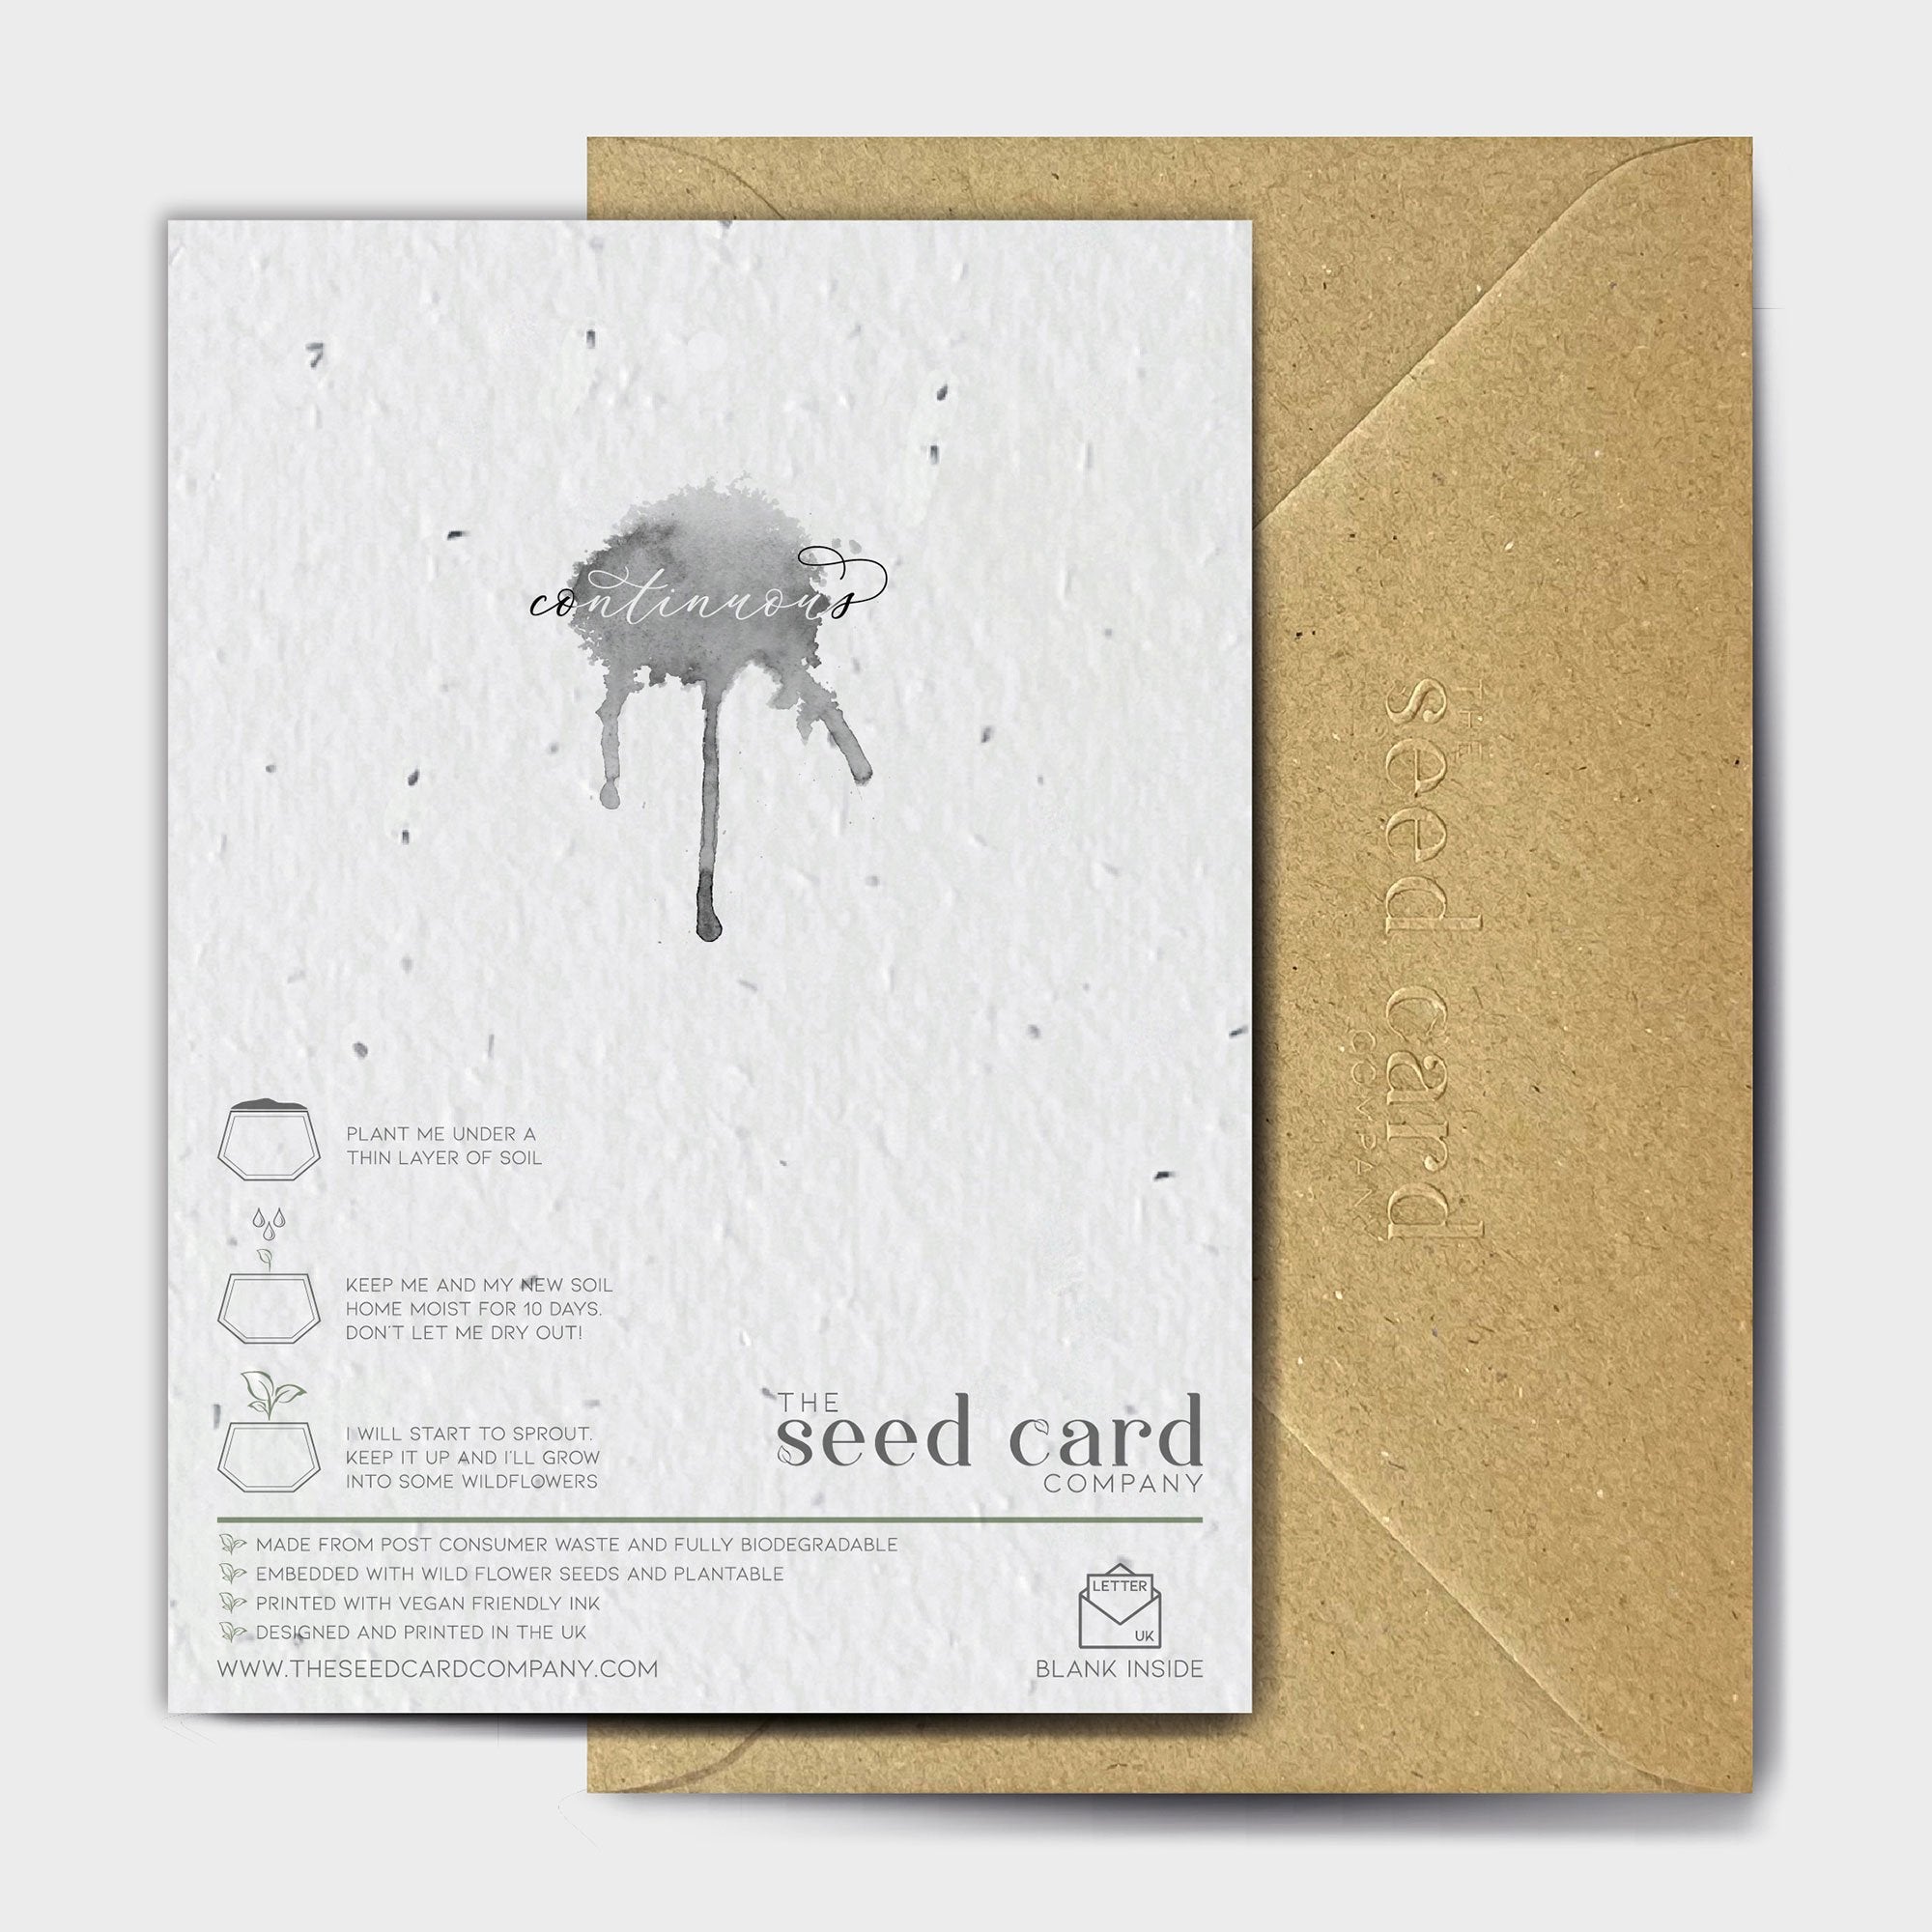 Shop online Golden Lab - 100% biodegradable seed-embedded cards Shop -The Seed Card Company